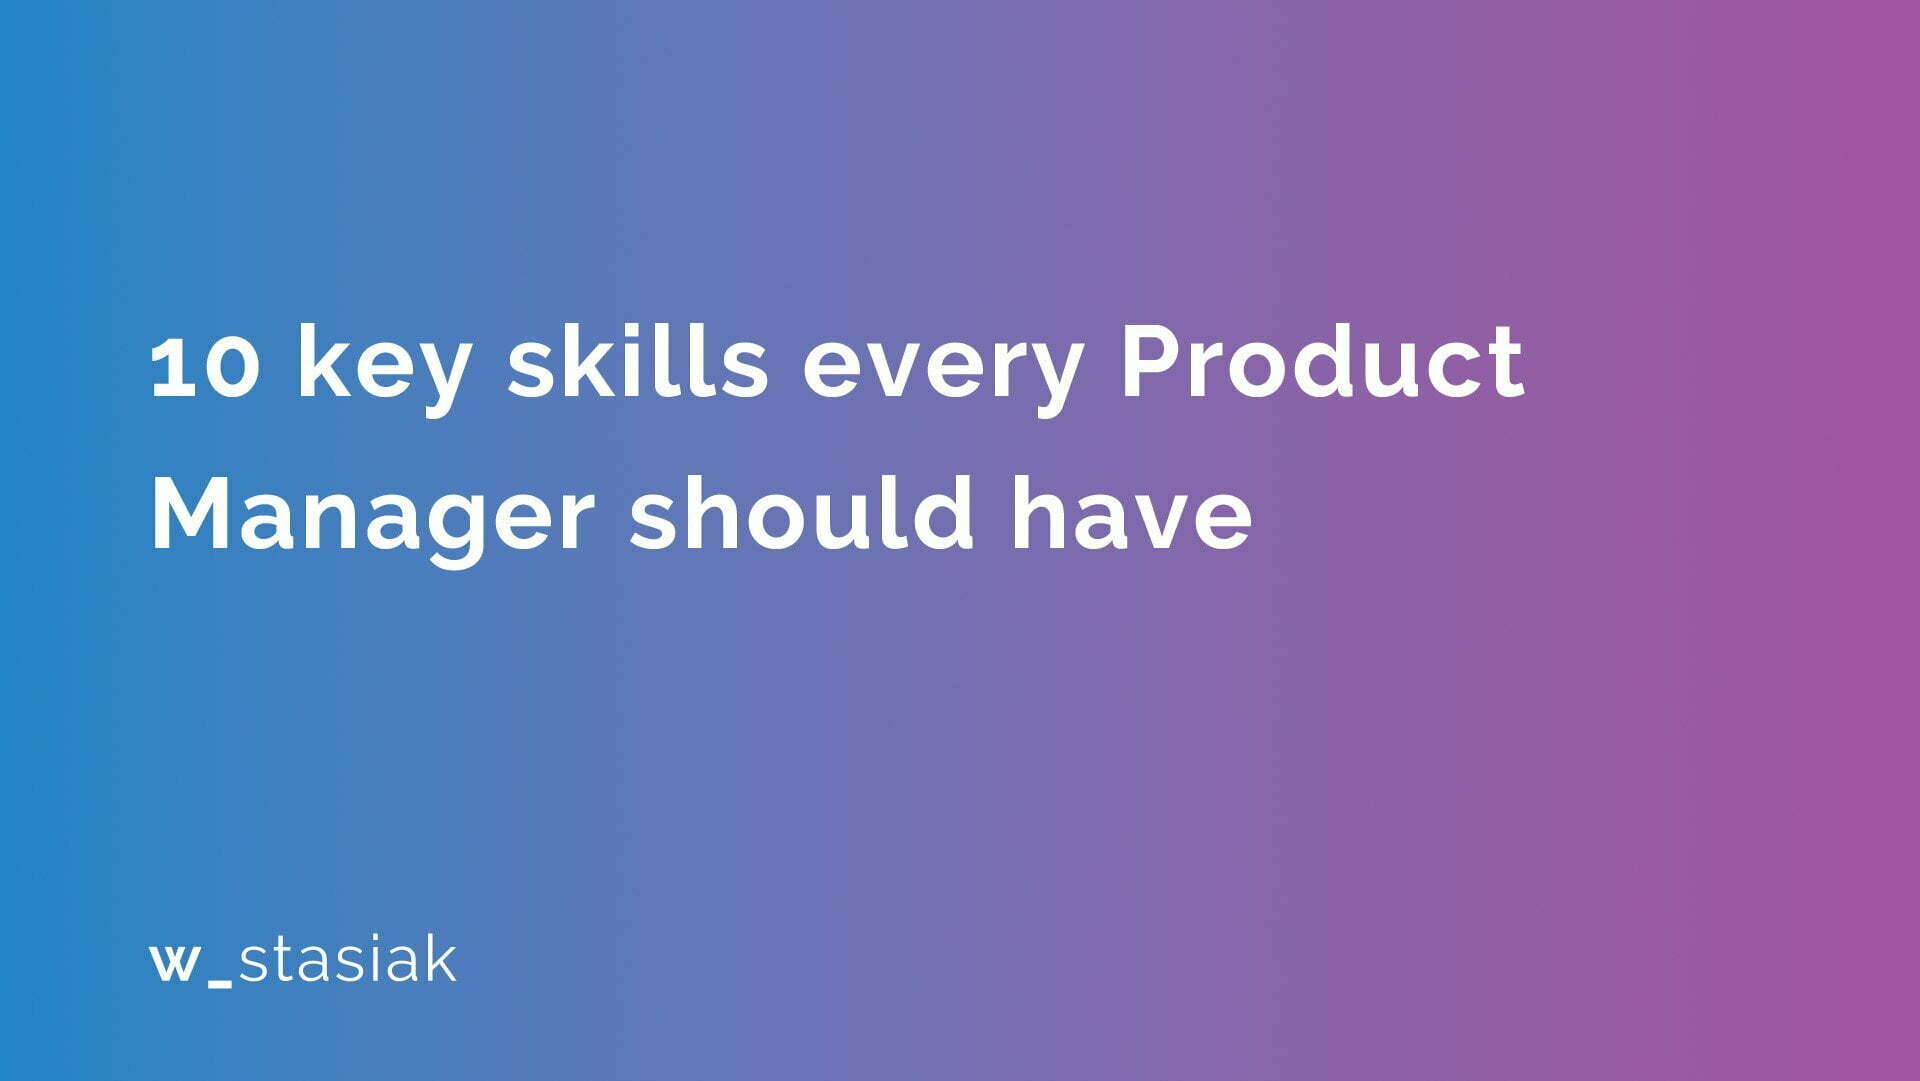 10 key skills every Product Manager should have - ws